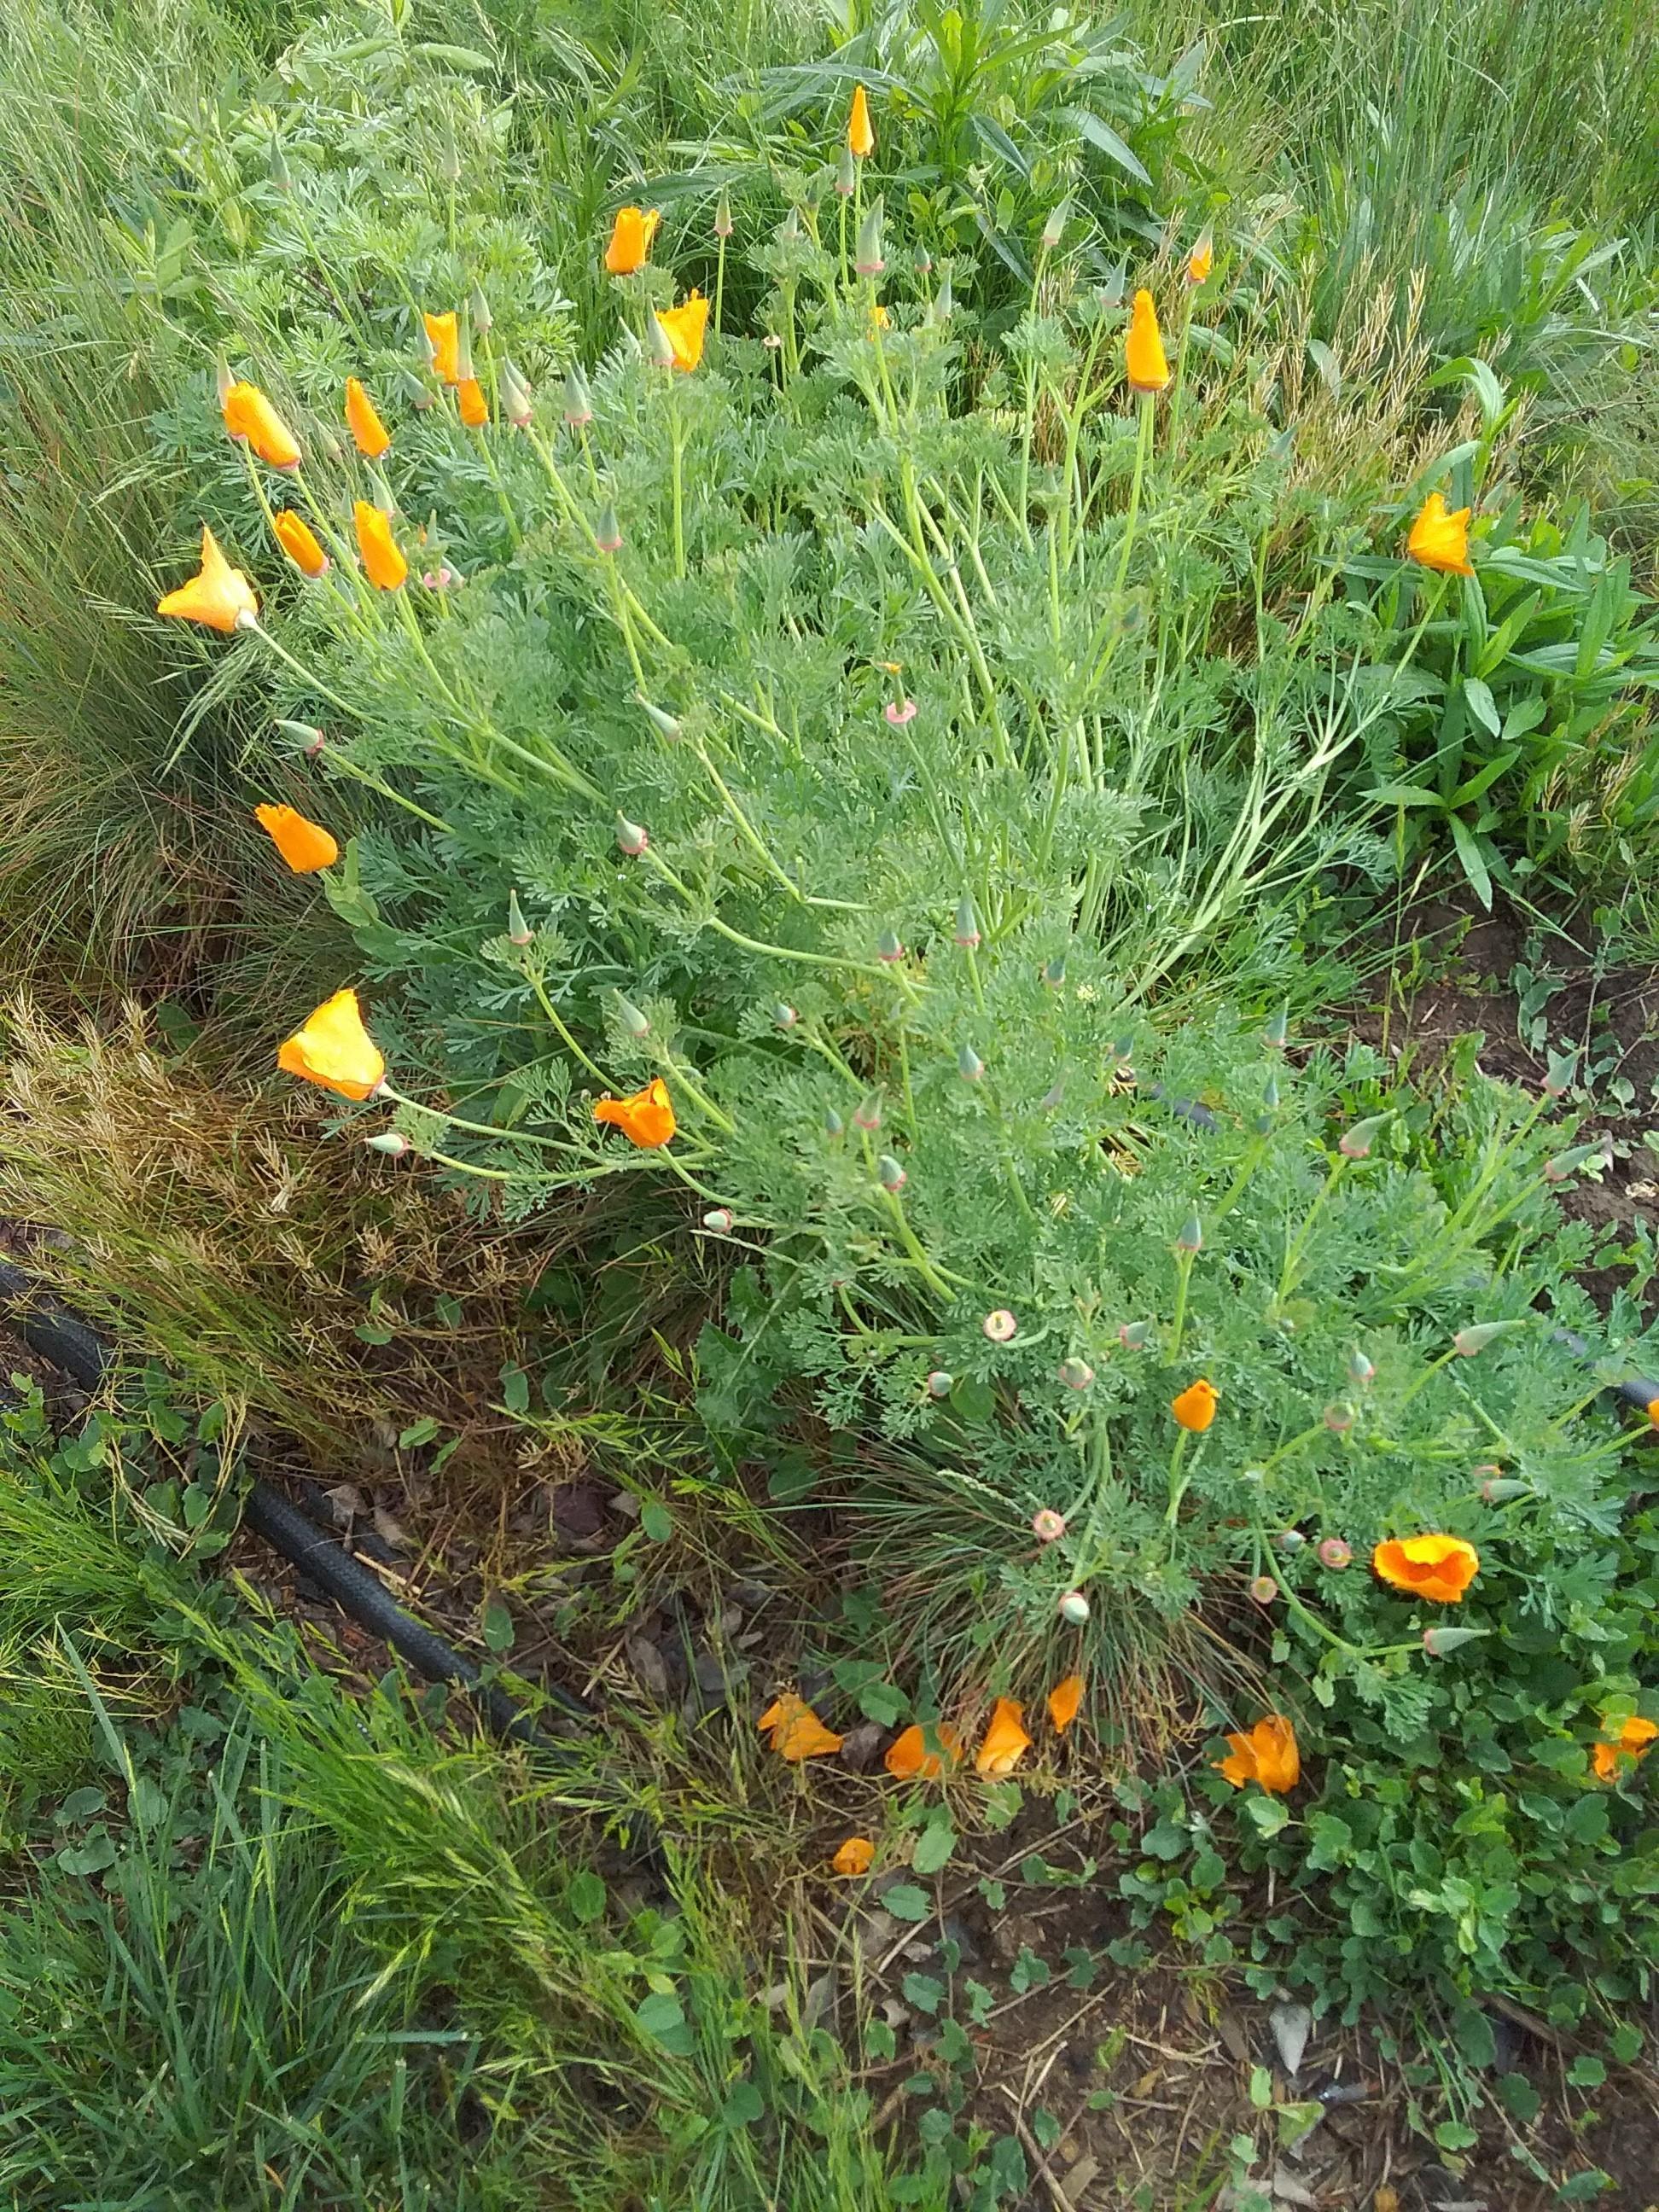 An overhead view of a California poppy abloom with more than a dozen flowers.